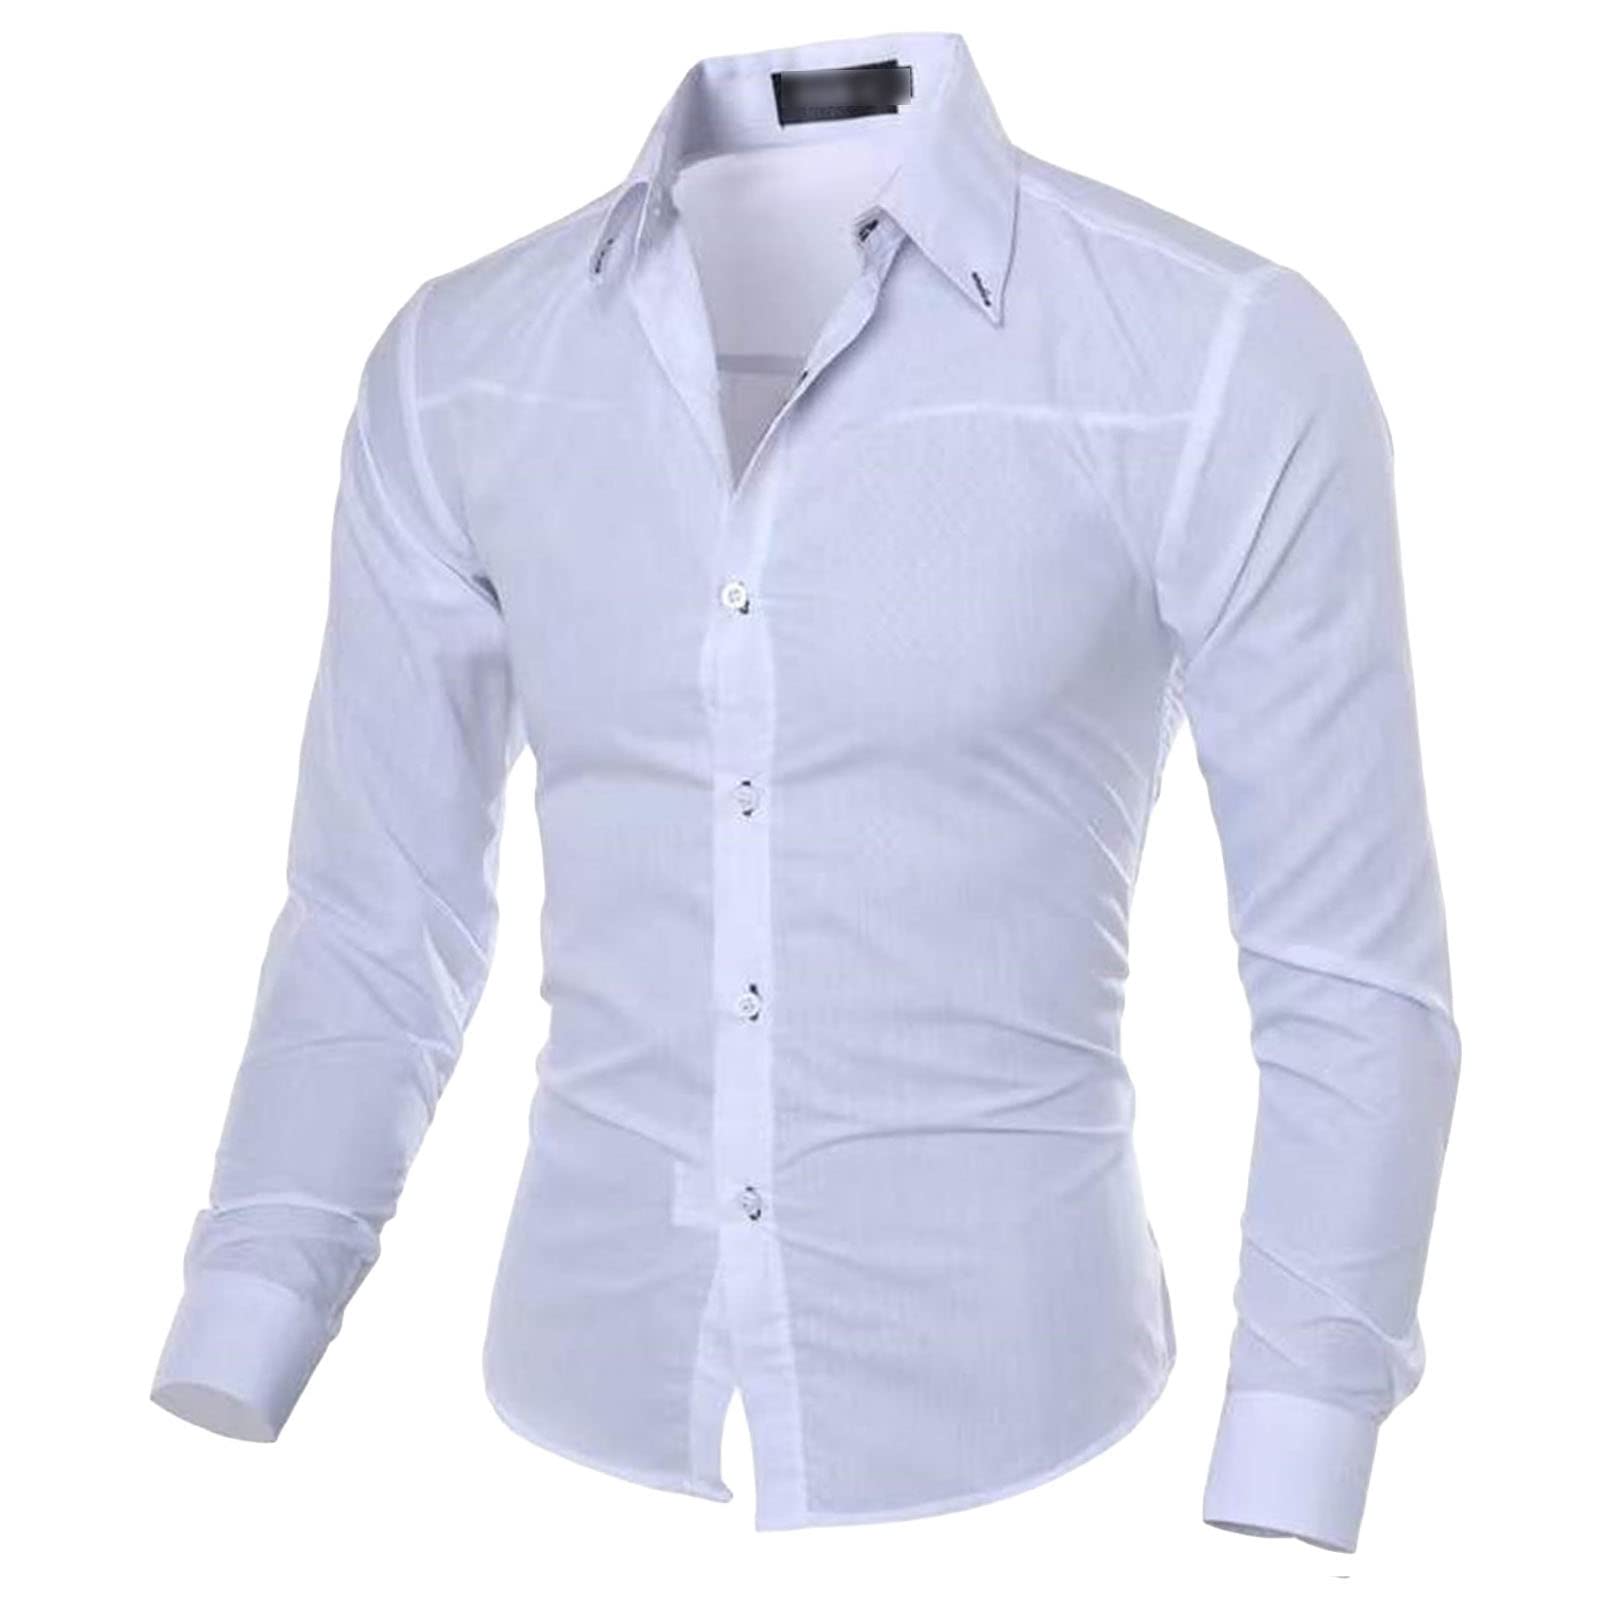 Men's Lightweight Casual Classic Dress Shirt Stylish Solid Button Down Shirts Loose Fit Long Sleeve Shirts (White,XX-Large)